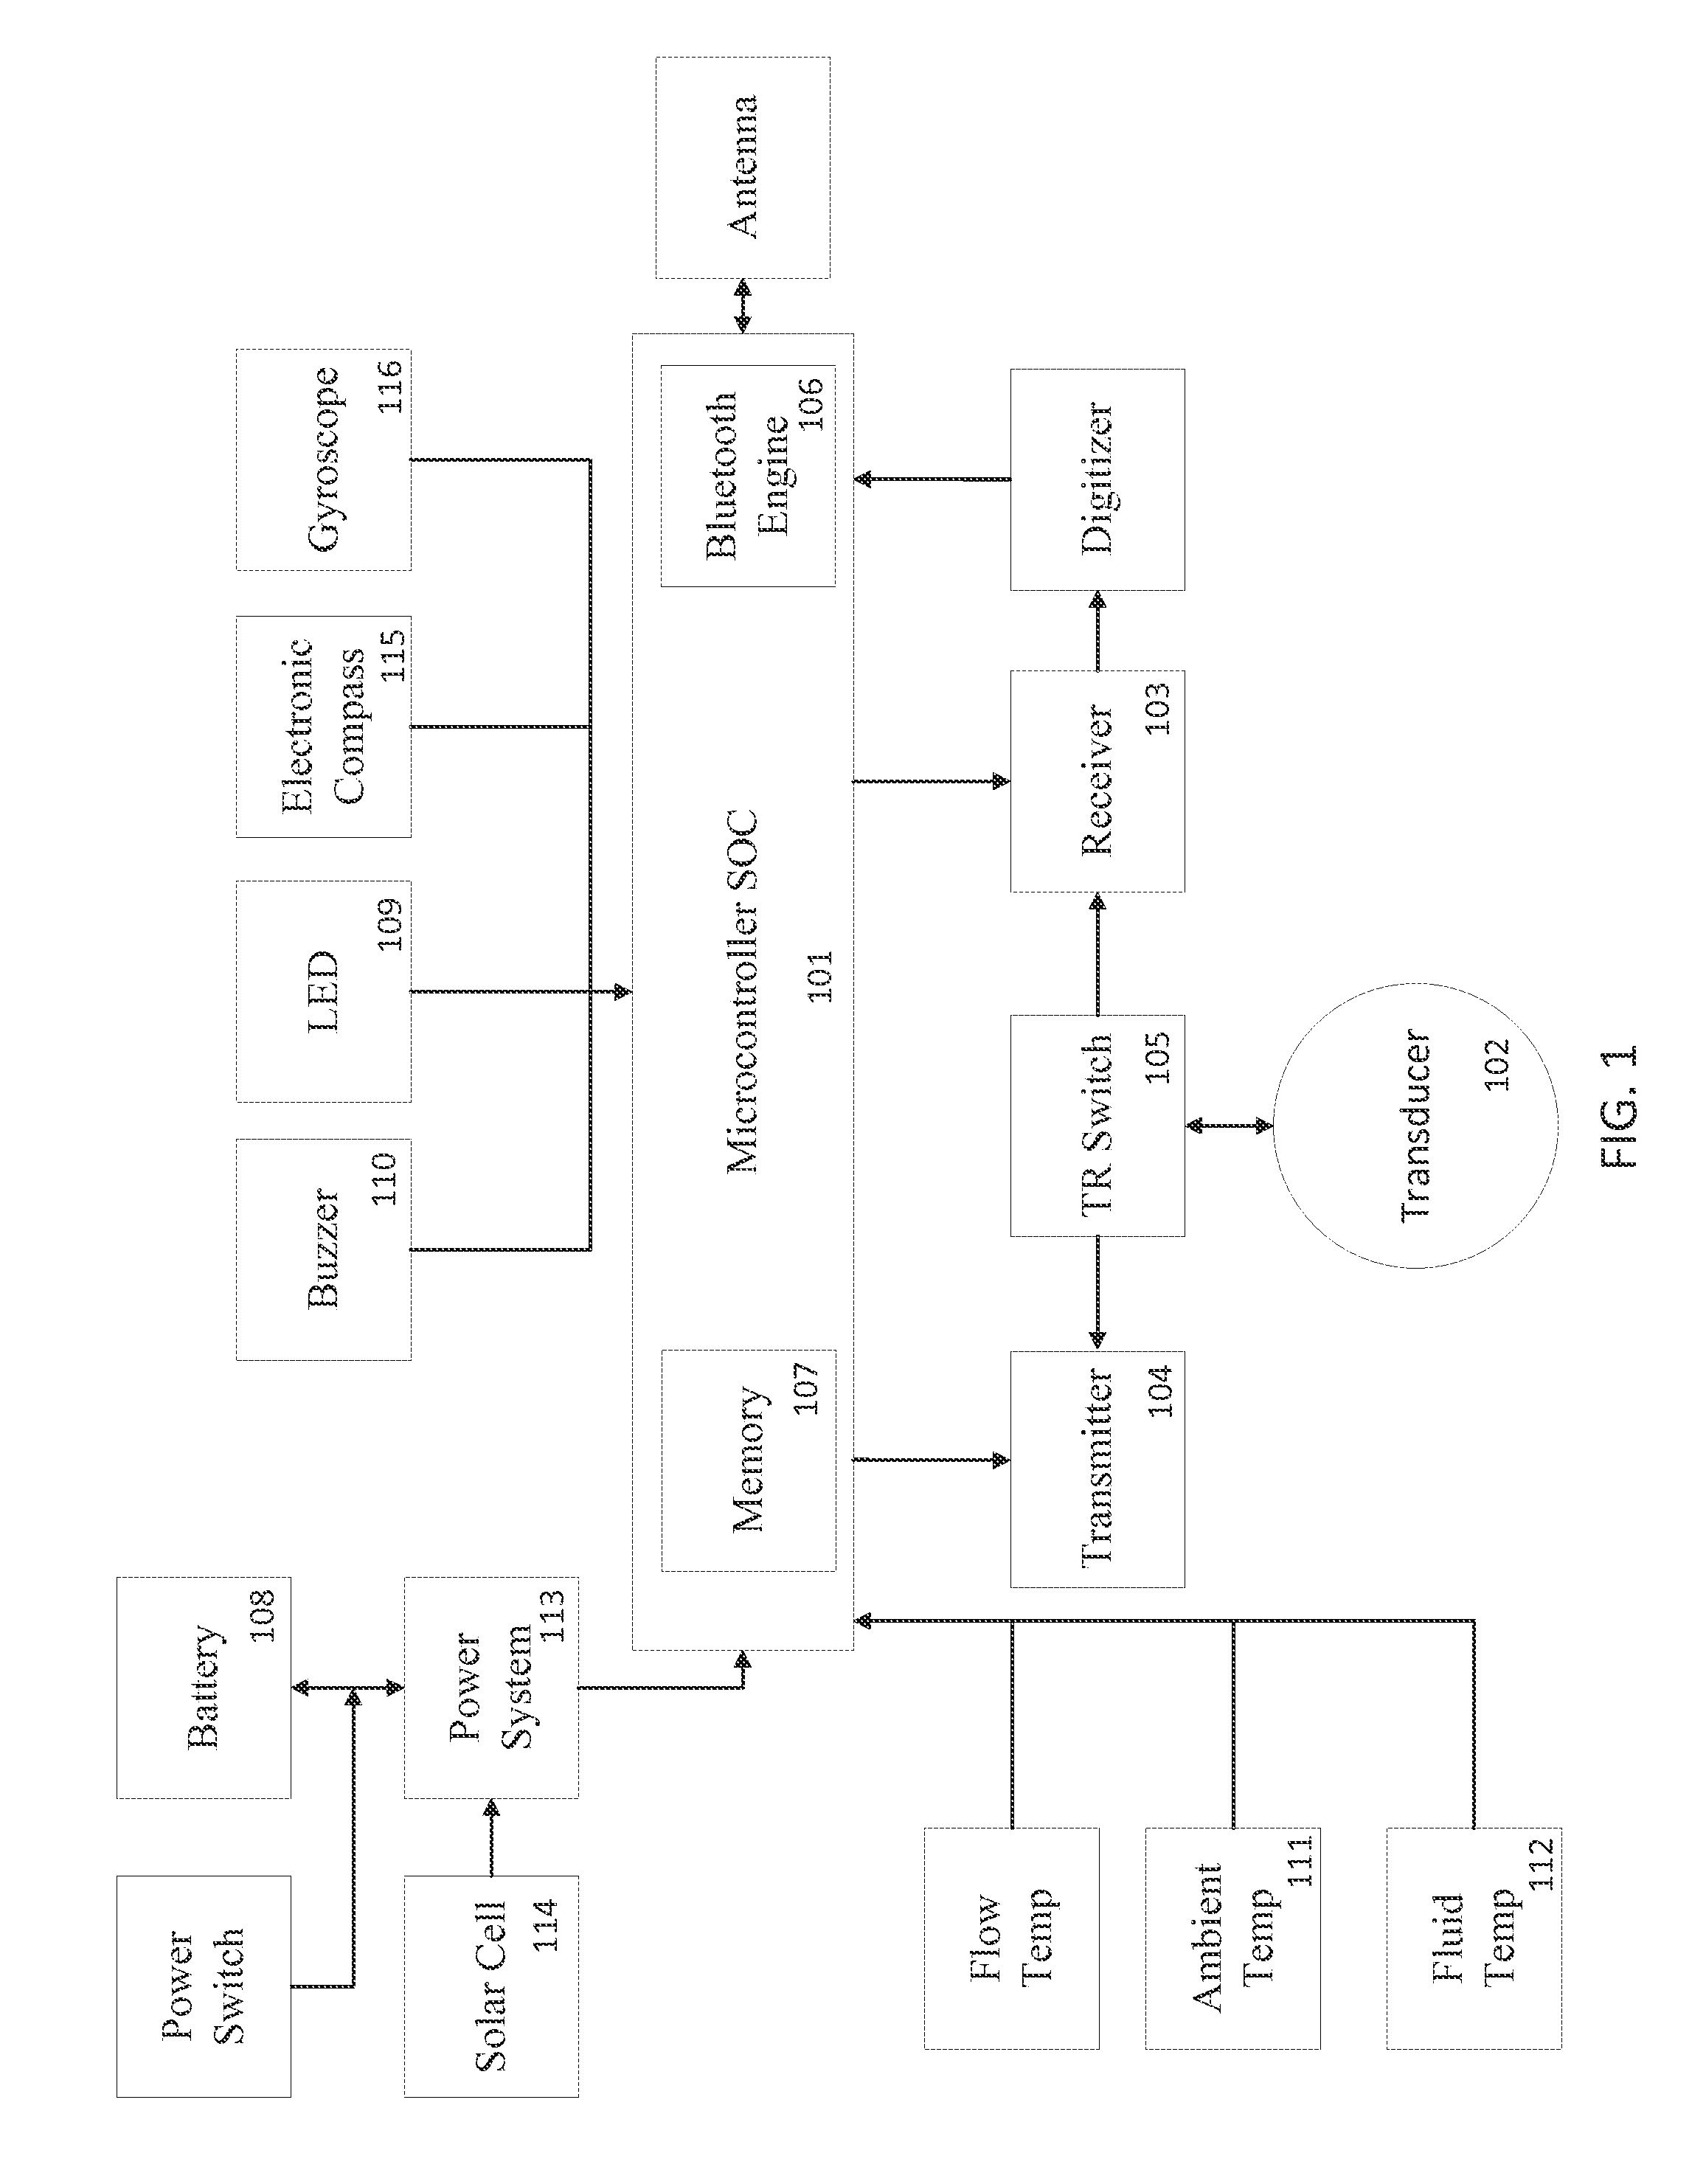 System and method for finding fish using a sonar device and a remote computing system